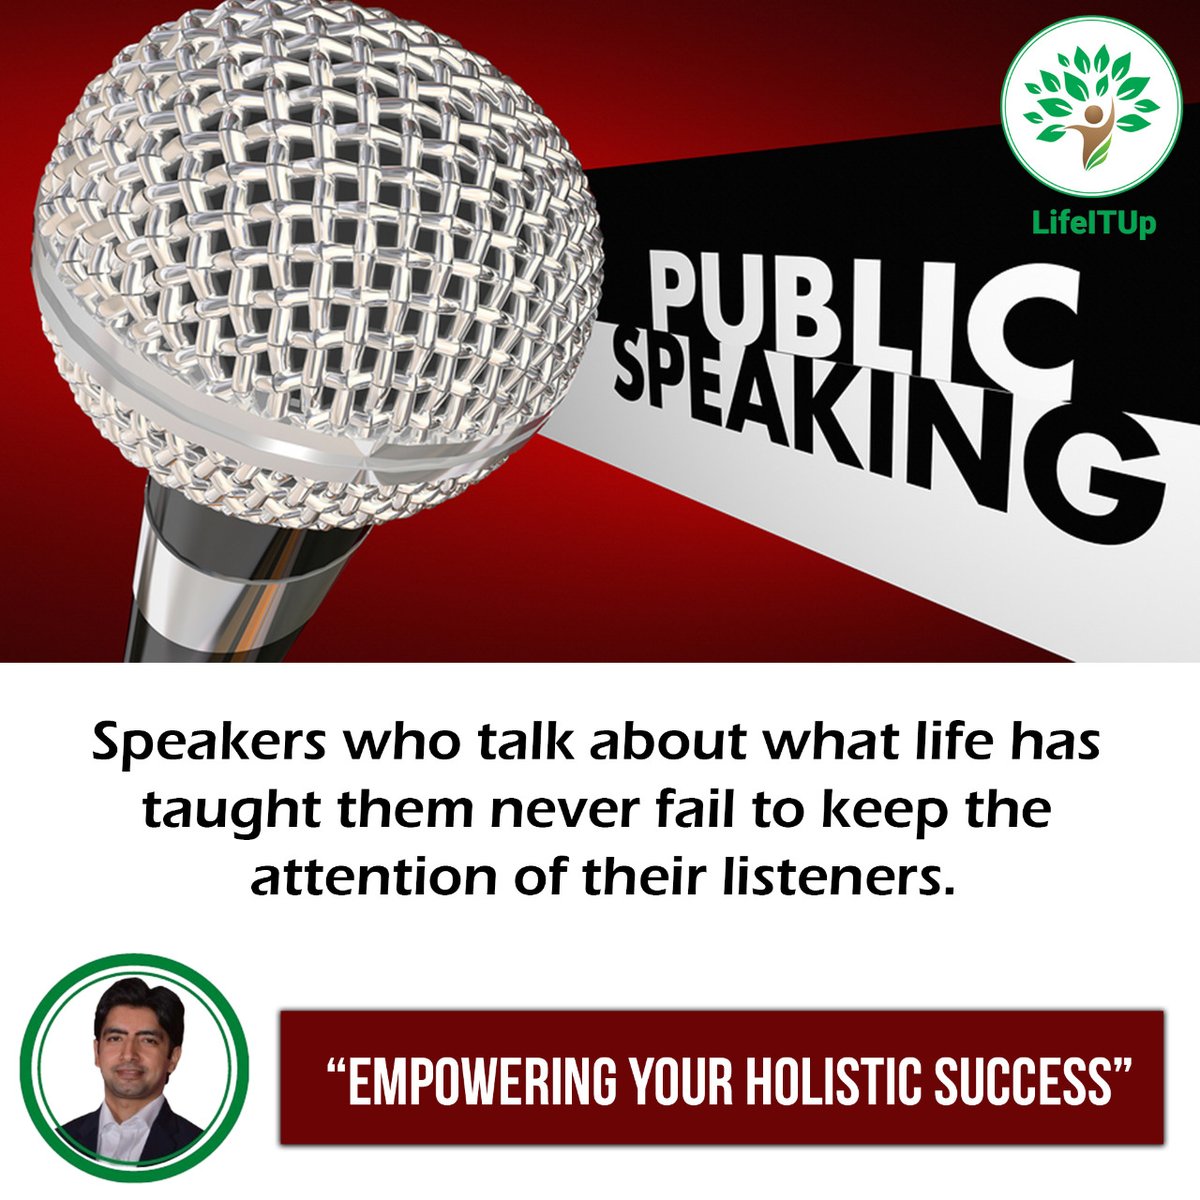 If you can speak, you can influence. If you can influence, you can change lives.” 
lifeitupglobal.com
.
.
.
#KapilTuli #PublicSpeaking #CareerGrowth #SuccessMindset #Intelligence #Sales #Nohindrance #SpeakwithConfidence #GrowthMindset #Success #PresentationSkills #Mastery